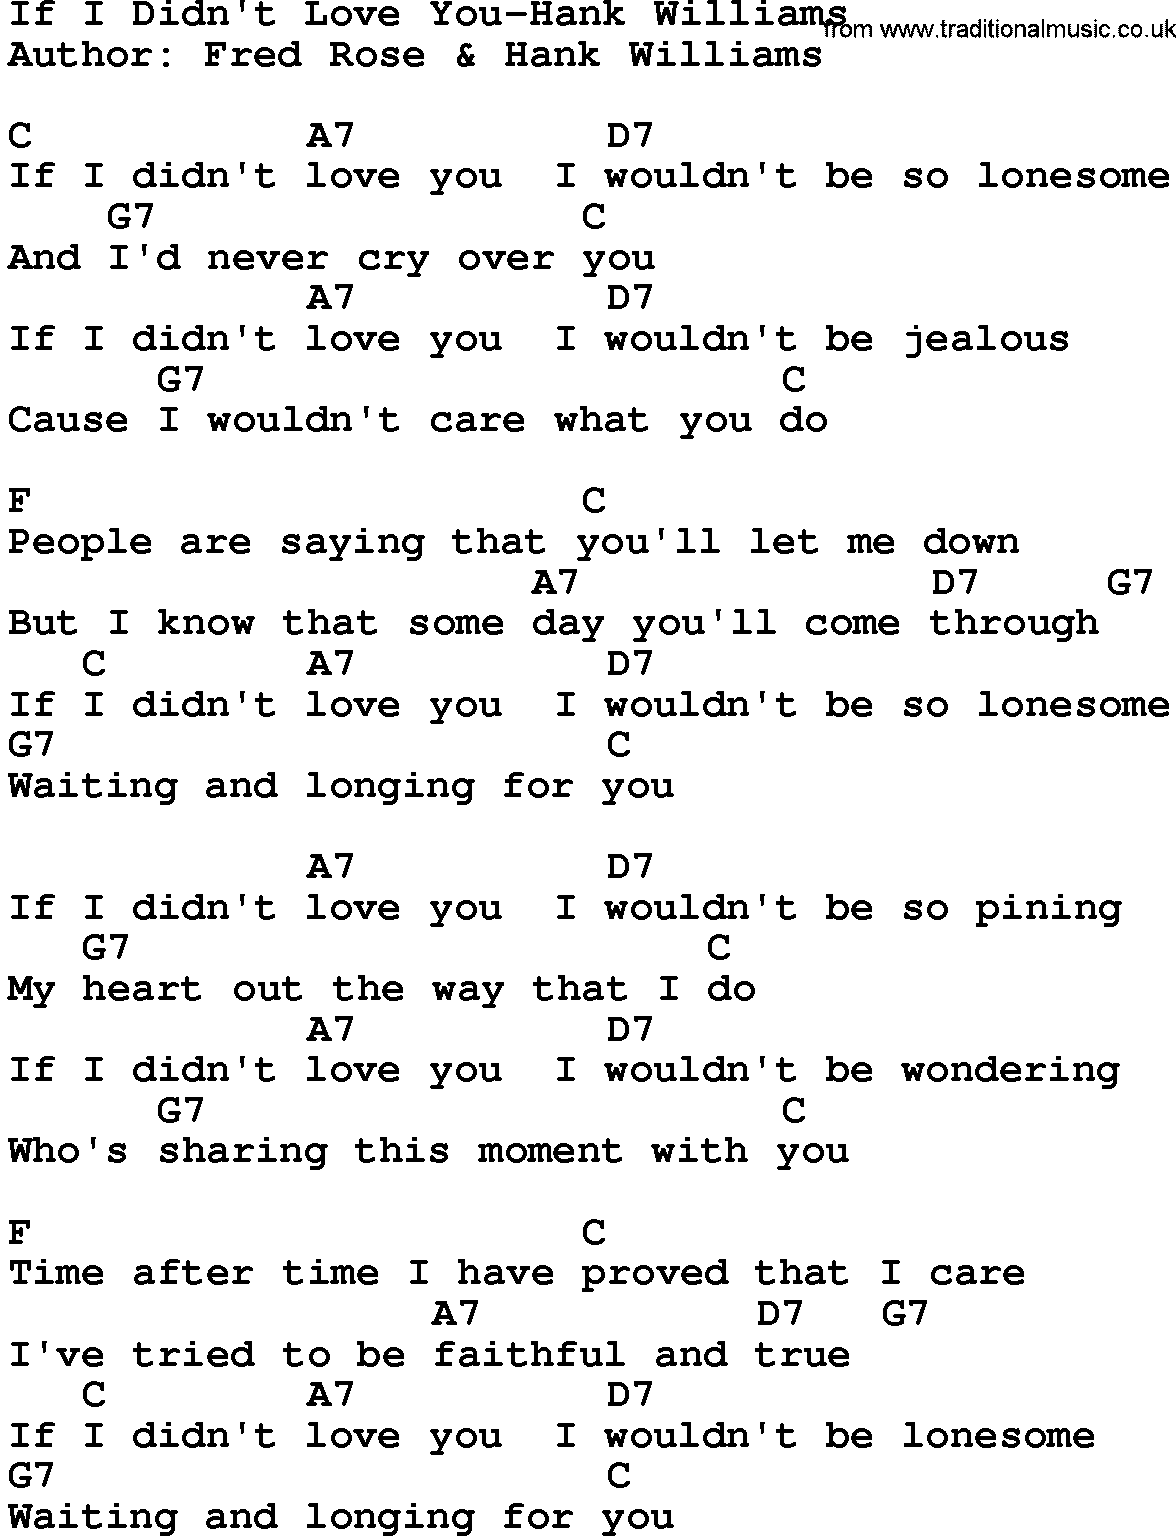 Country music song: If I Didn't Love You-Hank Williams lyrics and chords